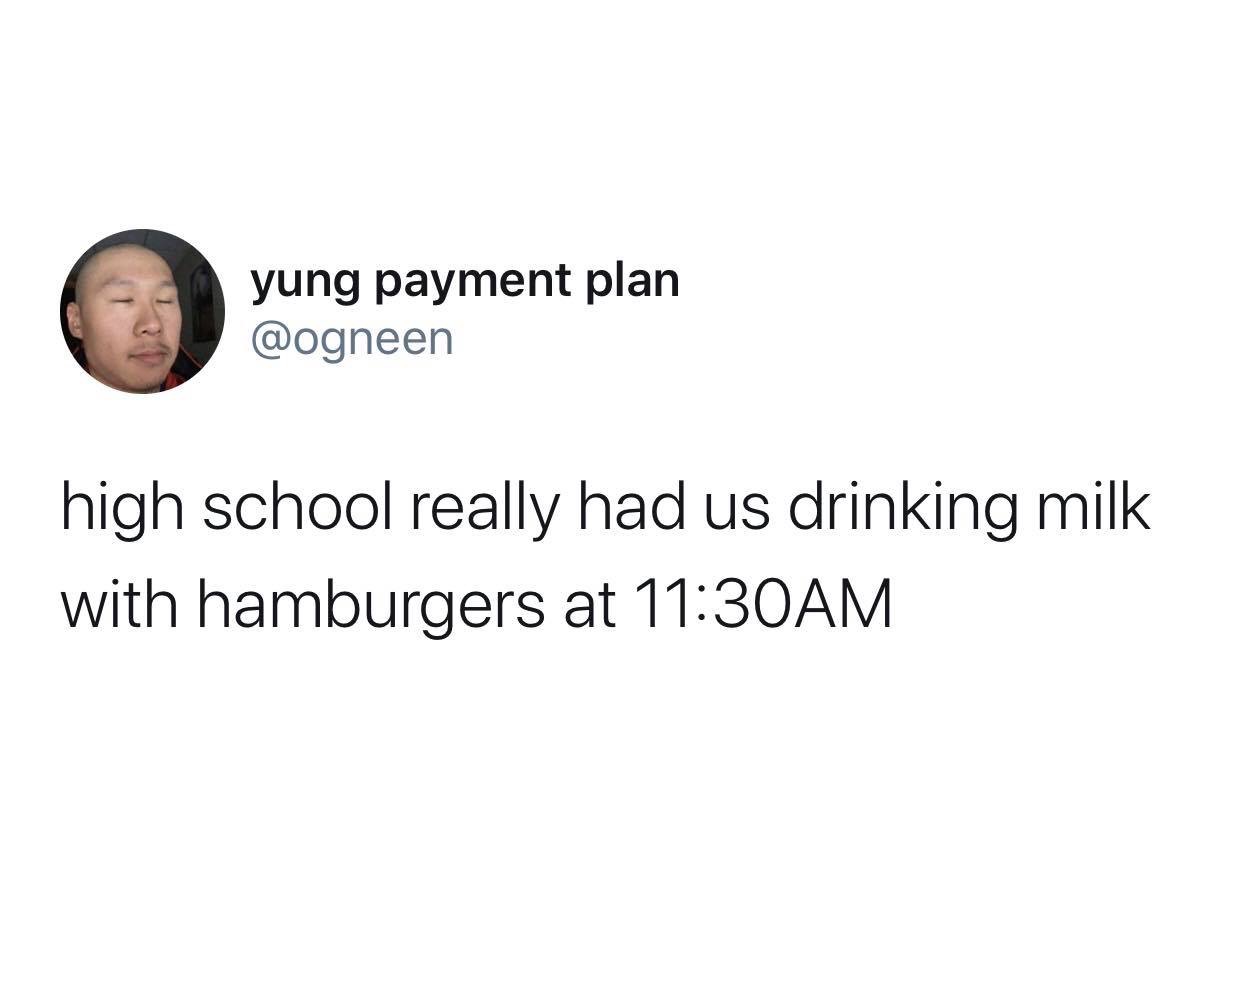 stupid funny tweets - yung payment plan high school really had us drinking milk with hamburgers at Am